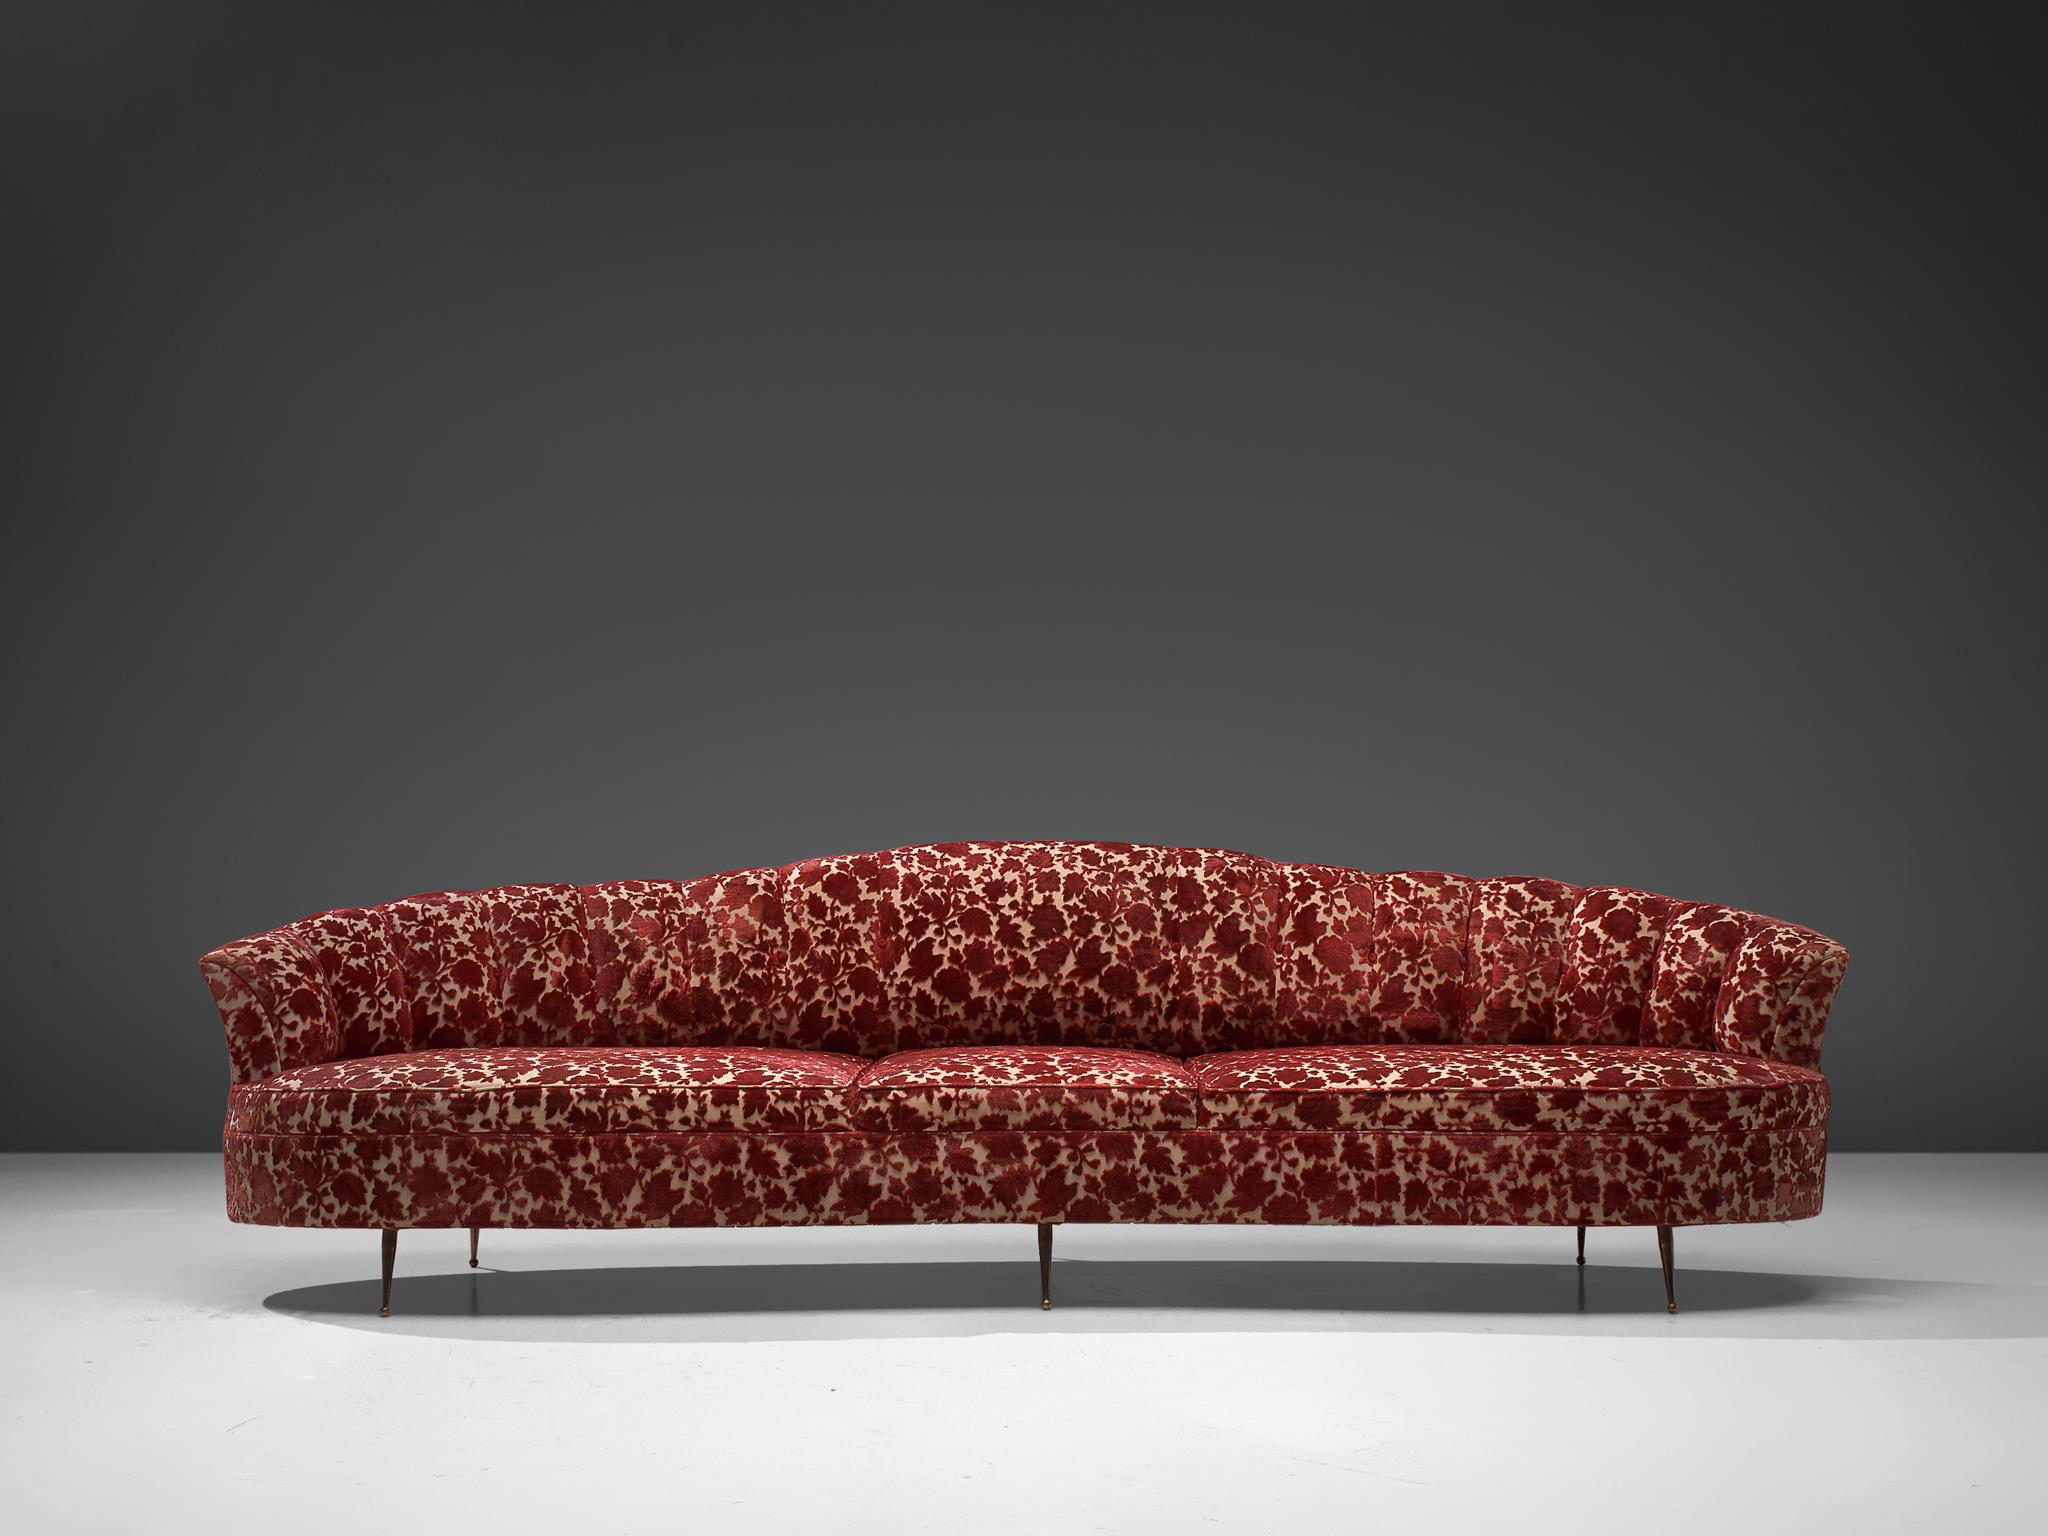 Sofa, fabric and brass, Italy, 1950s

Elegant and large banana sofa with a serpentine backrest. The sofa is theatrical in its look, which is emphasized by the Classic fabric. The sloping backrest is lined and higher in the middle. The seat rests